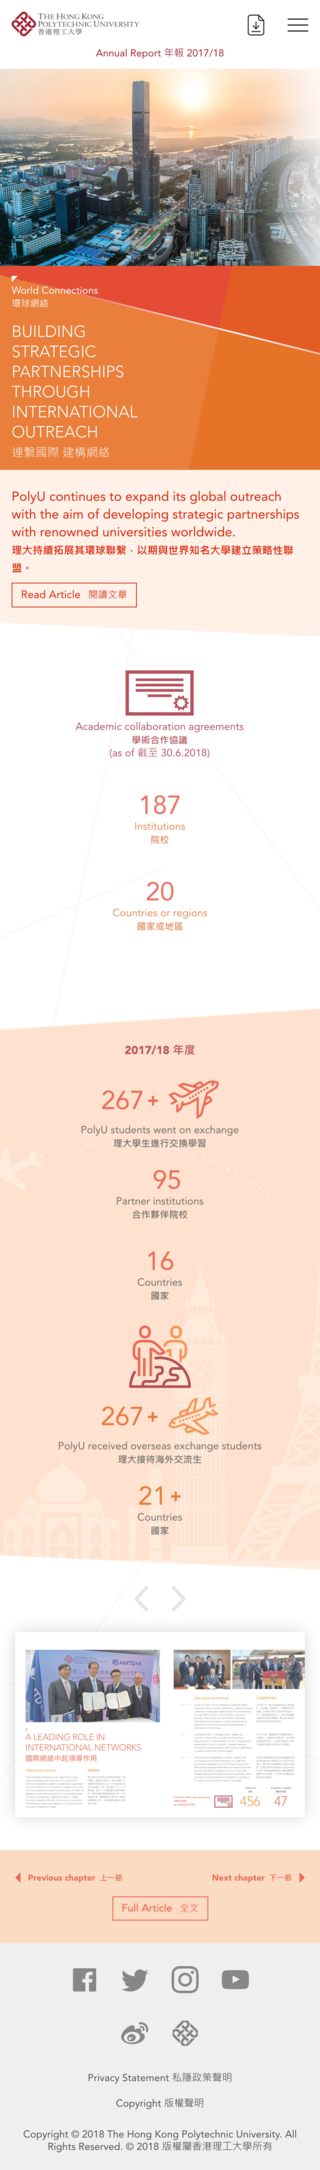 Mobile PolyU Annual Report 2017/18 World Connection